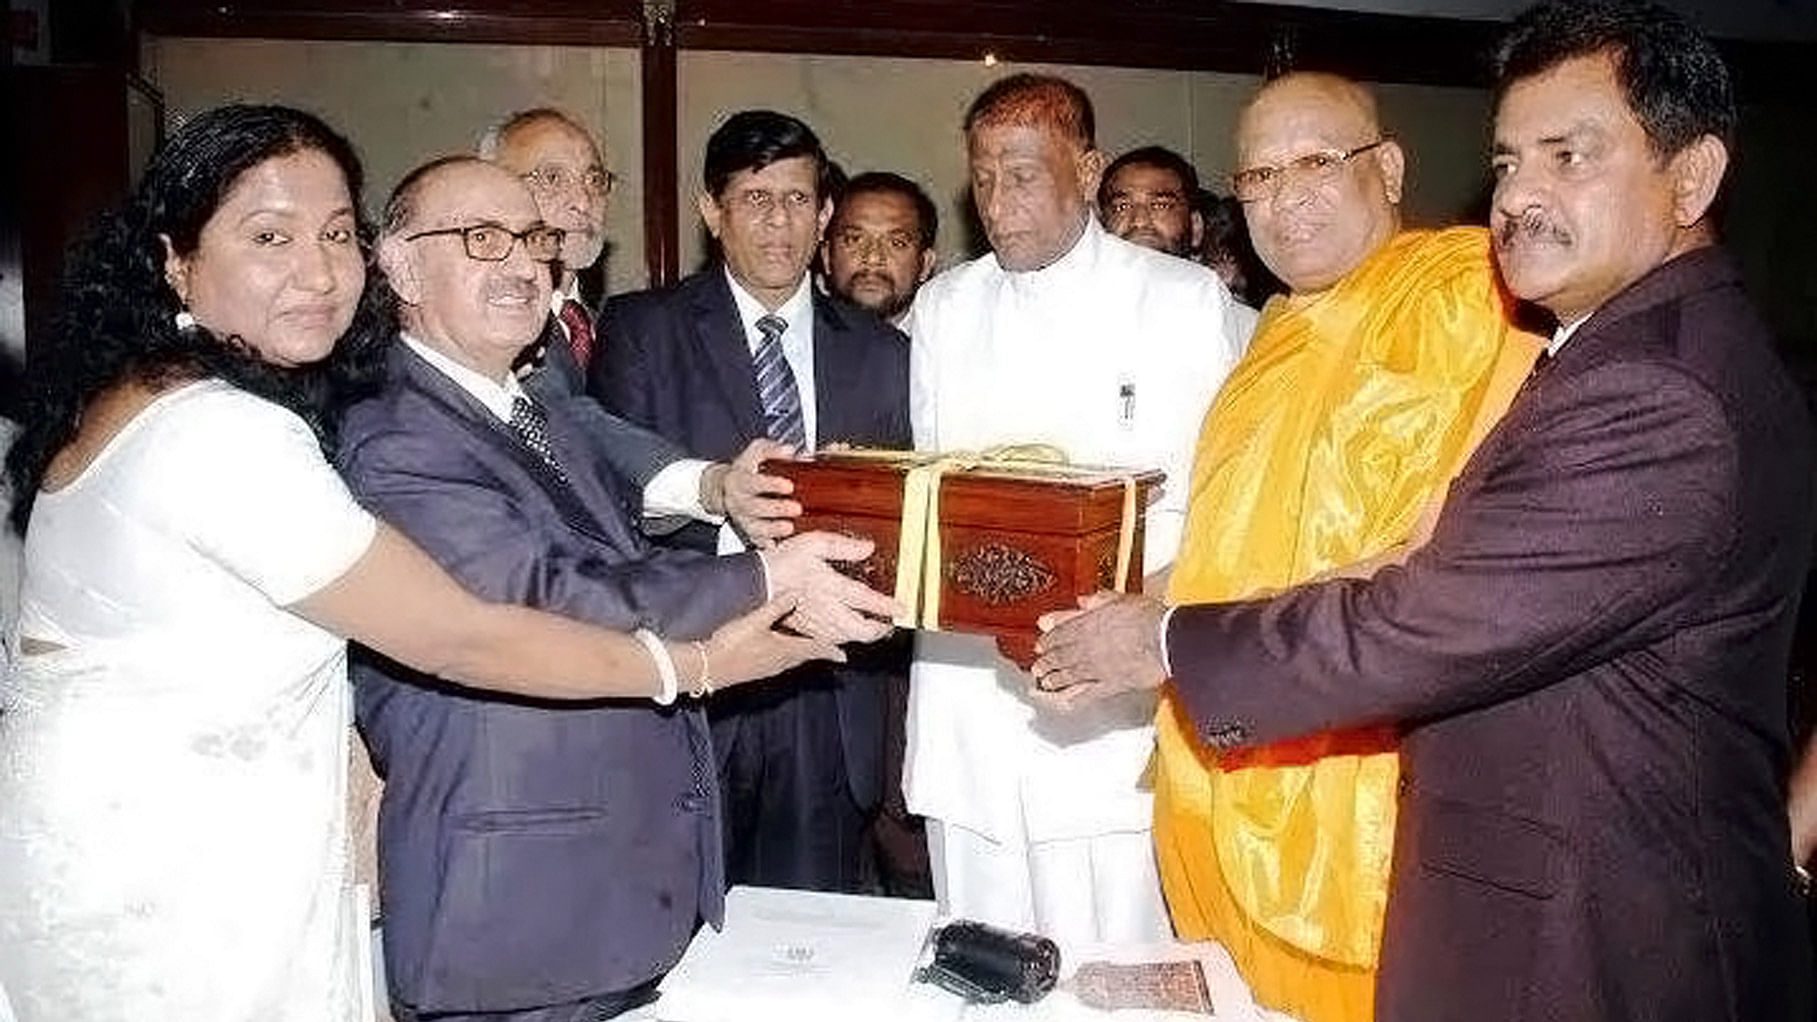 Pakistan’s Advisor on National History and Literary Heritage Irfan Siddiqui hands over  Holy Relics to the Sri Lankan Minister for Sustainable Development and Wildlife Gamini Jayawickrama Perera at Taxila Museum on 19 May 2016.&nbsp;(Photo Courtesy: <a href="https://www.facebook.com/Pakistan-High-Commision-Colombo-222389517863805/">Facebook/PakistanHighCommissionColombo</a>)